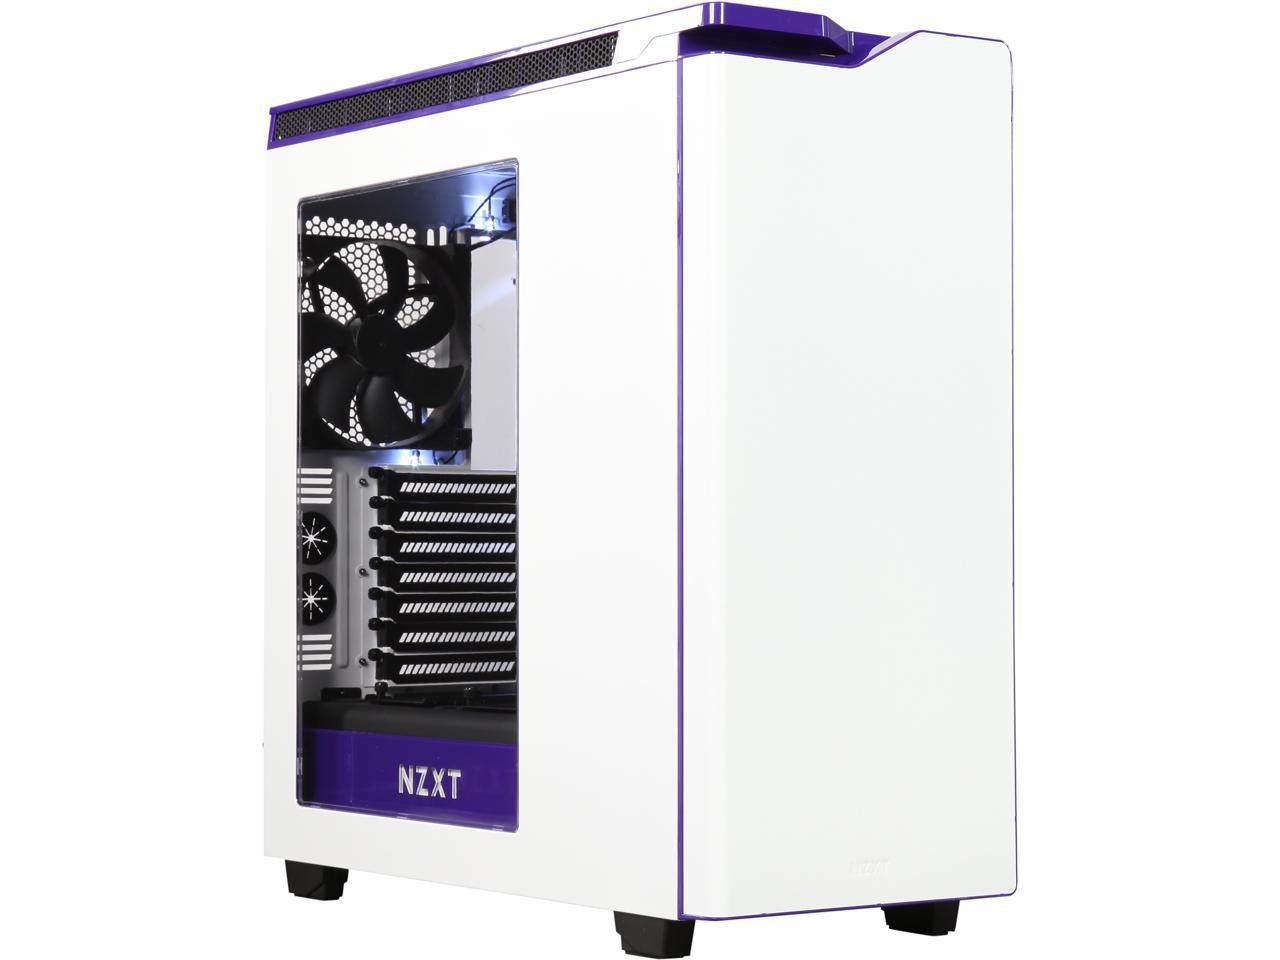 administration kort Omkostningsprocent Open Box: NZXT H440 STEEL Mid Tower Case. Next Generation 5.25-less Design.  Include 4 x 2nd Gen FNv2 Fans, High-End WC Support, USB3.0, PWM Fan Hub,  White/Purple - Newegg.com